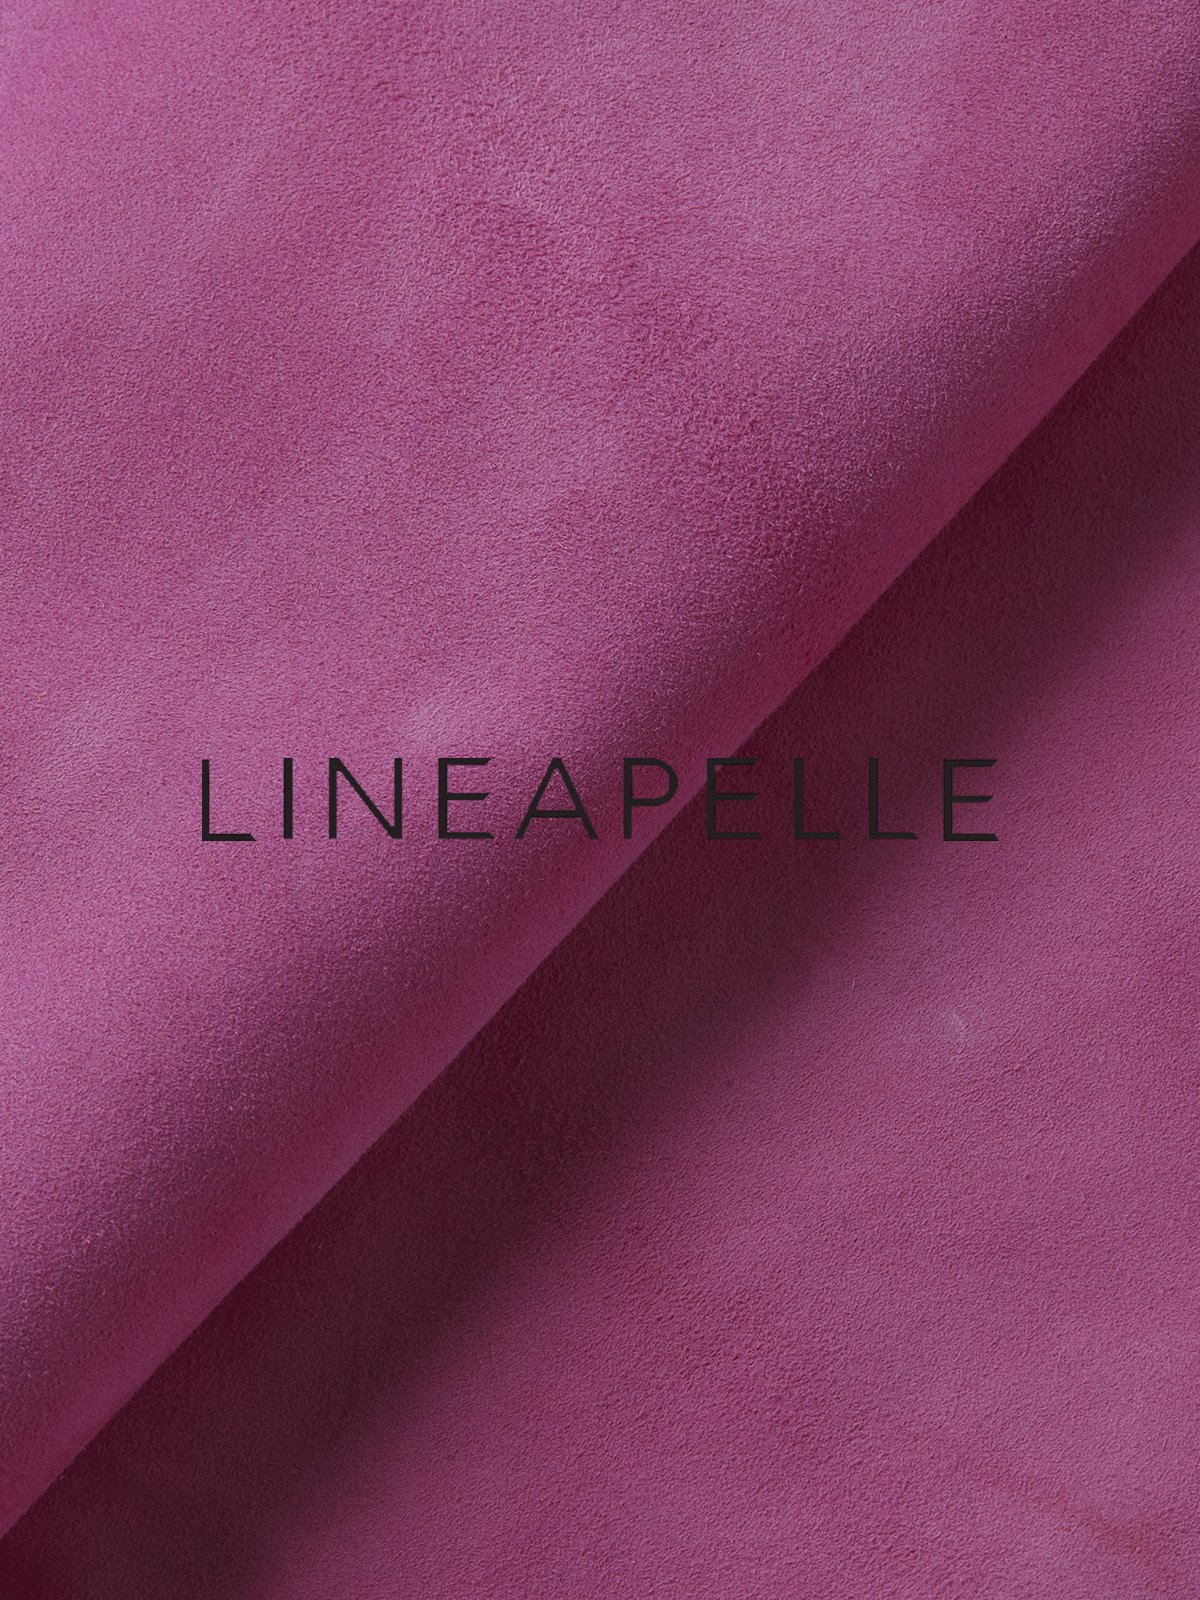 Lineapelle, it's time for tomorrow to bloom. From February 21 to 23, at Fiera Milano Rho.